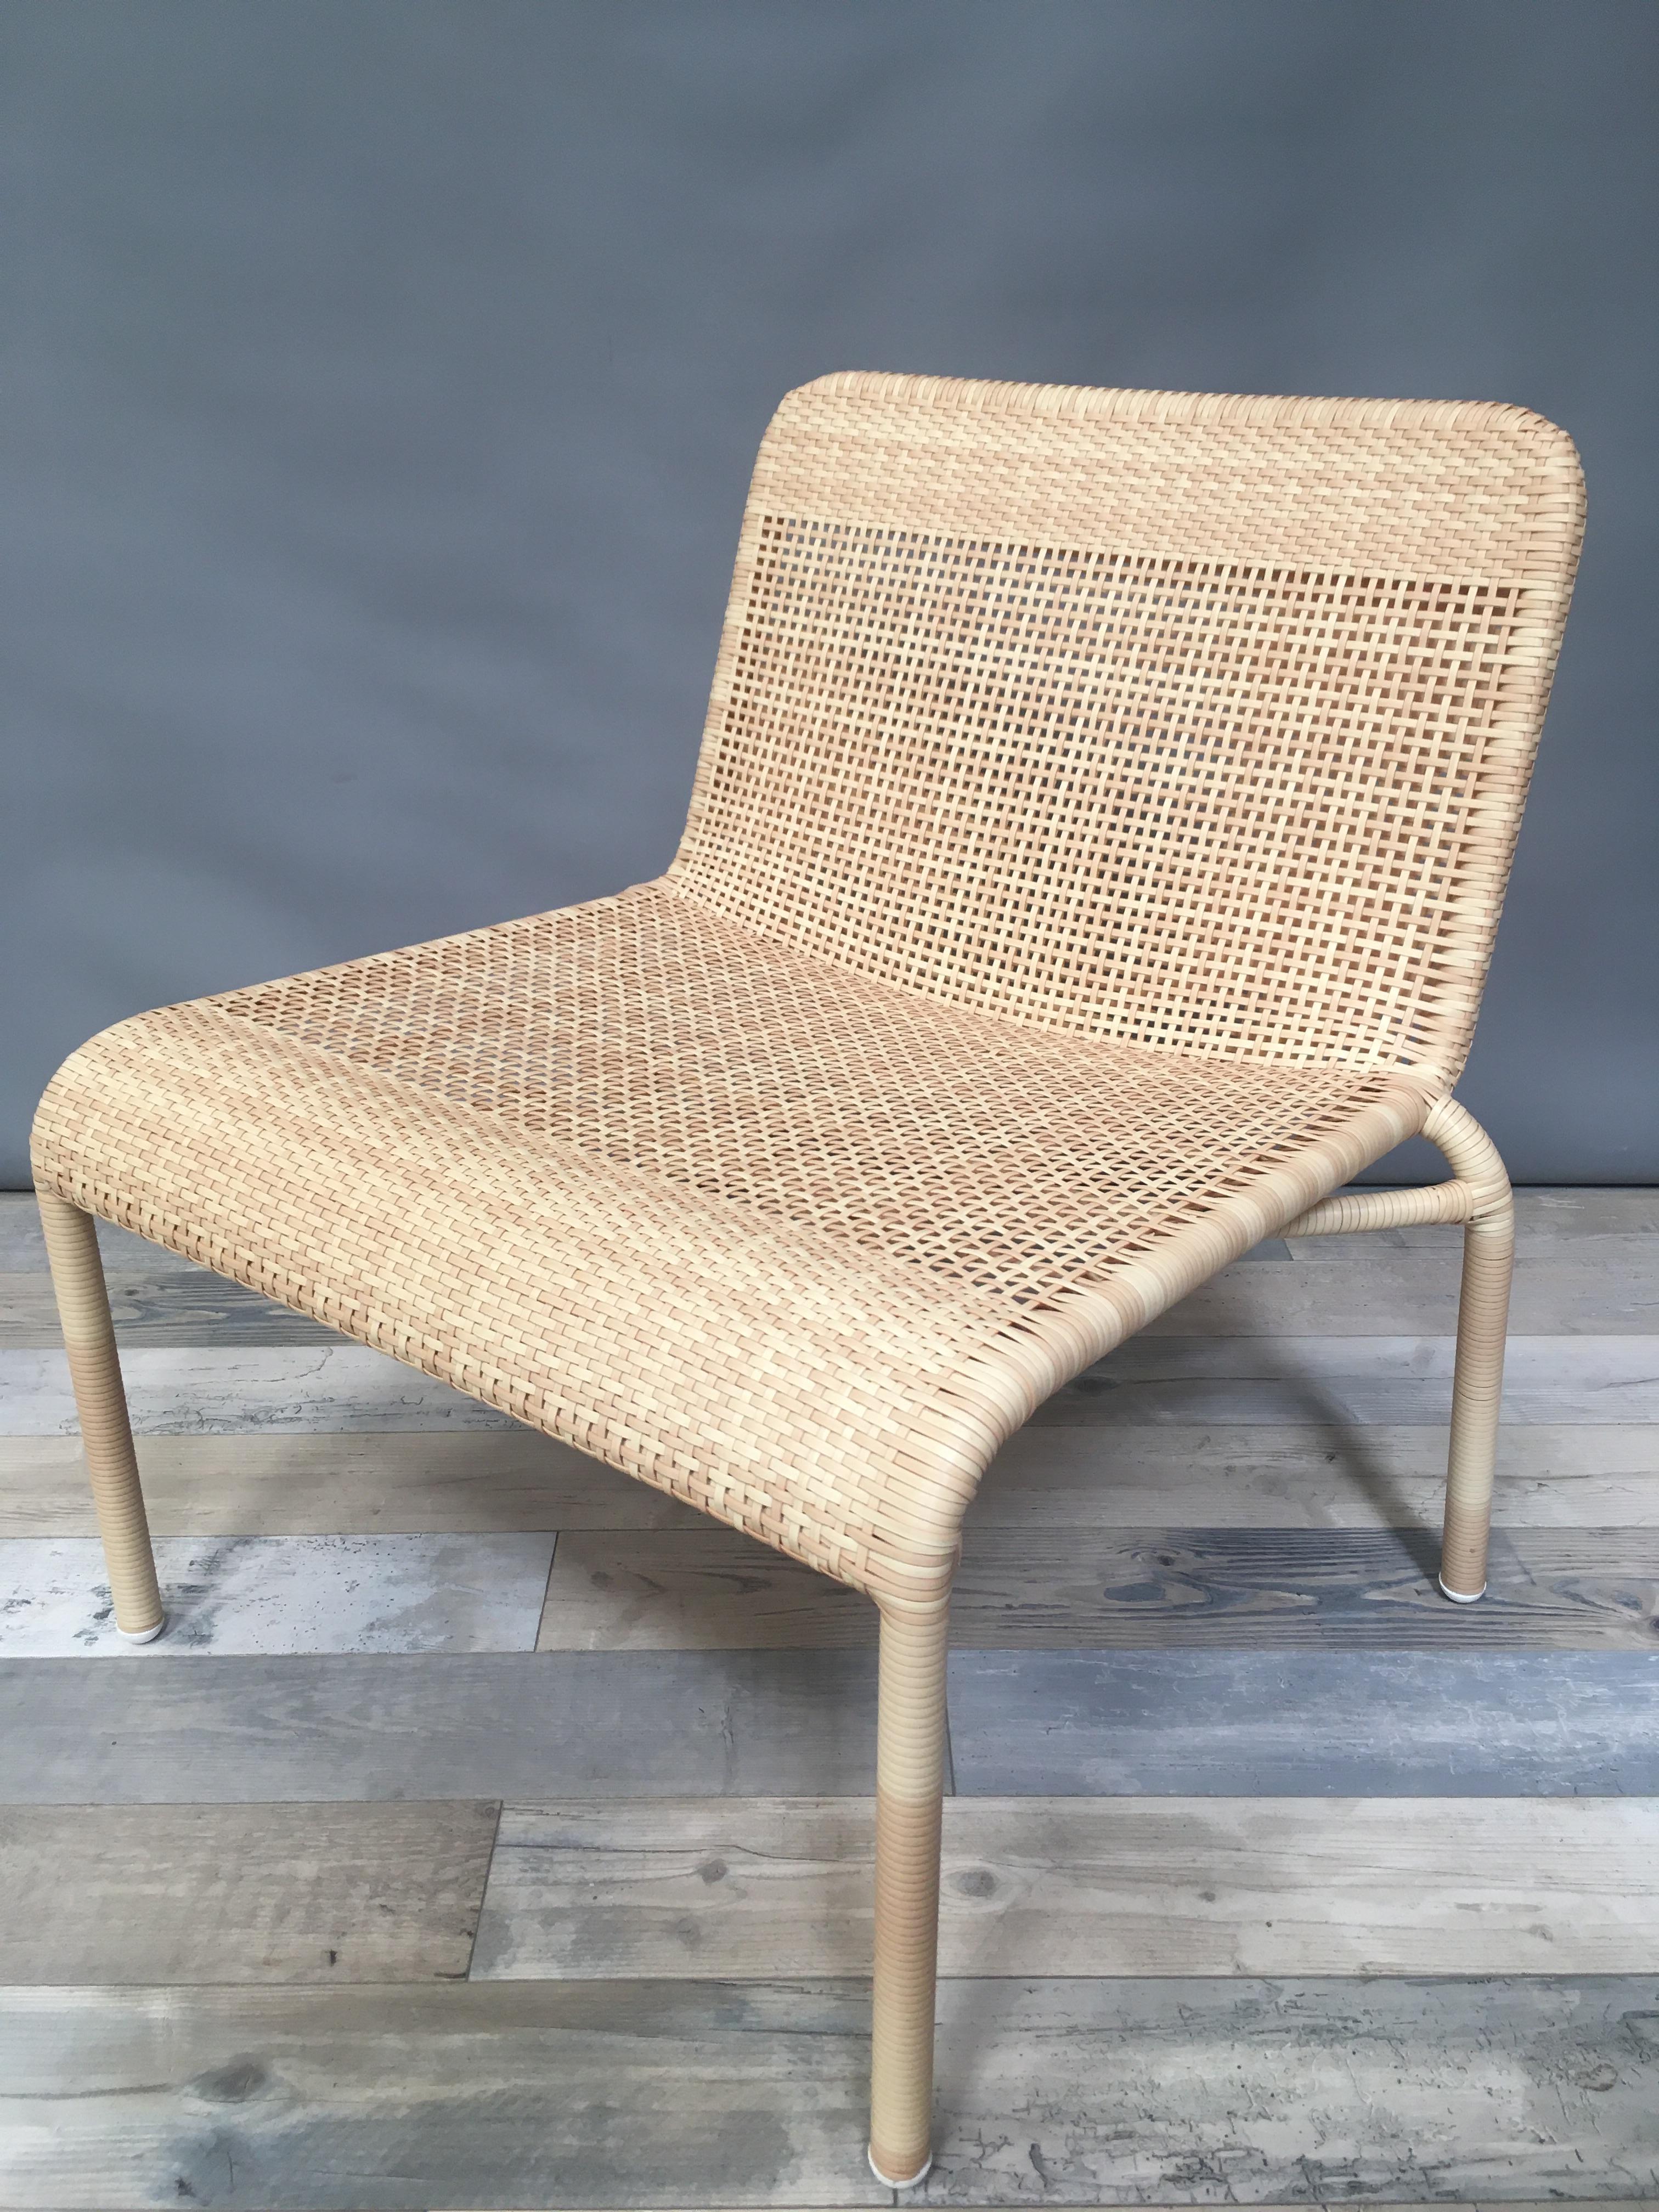 Braided resin rattan effect lounge chair indoor or outdoor use. It will be perfect on your terrace, in your veranda, your winter garden, even around the swimming pool! French design and Retro style, practical (stackable!) Never used.